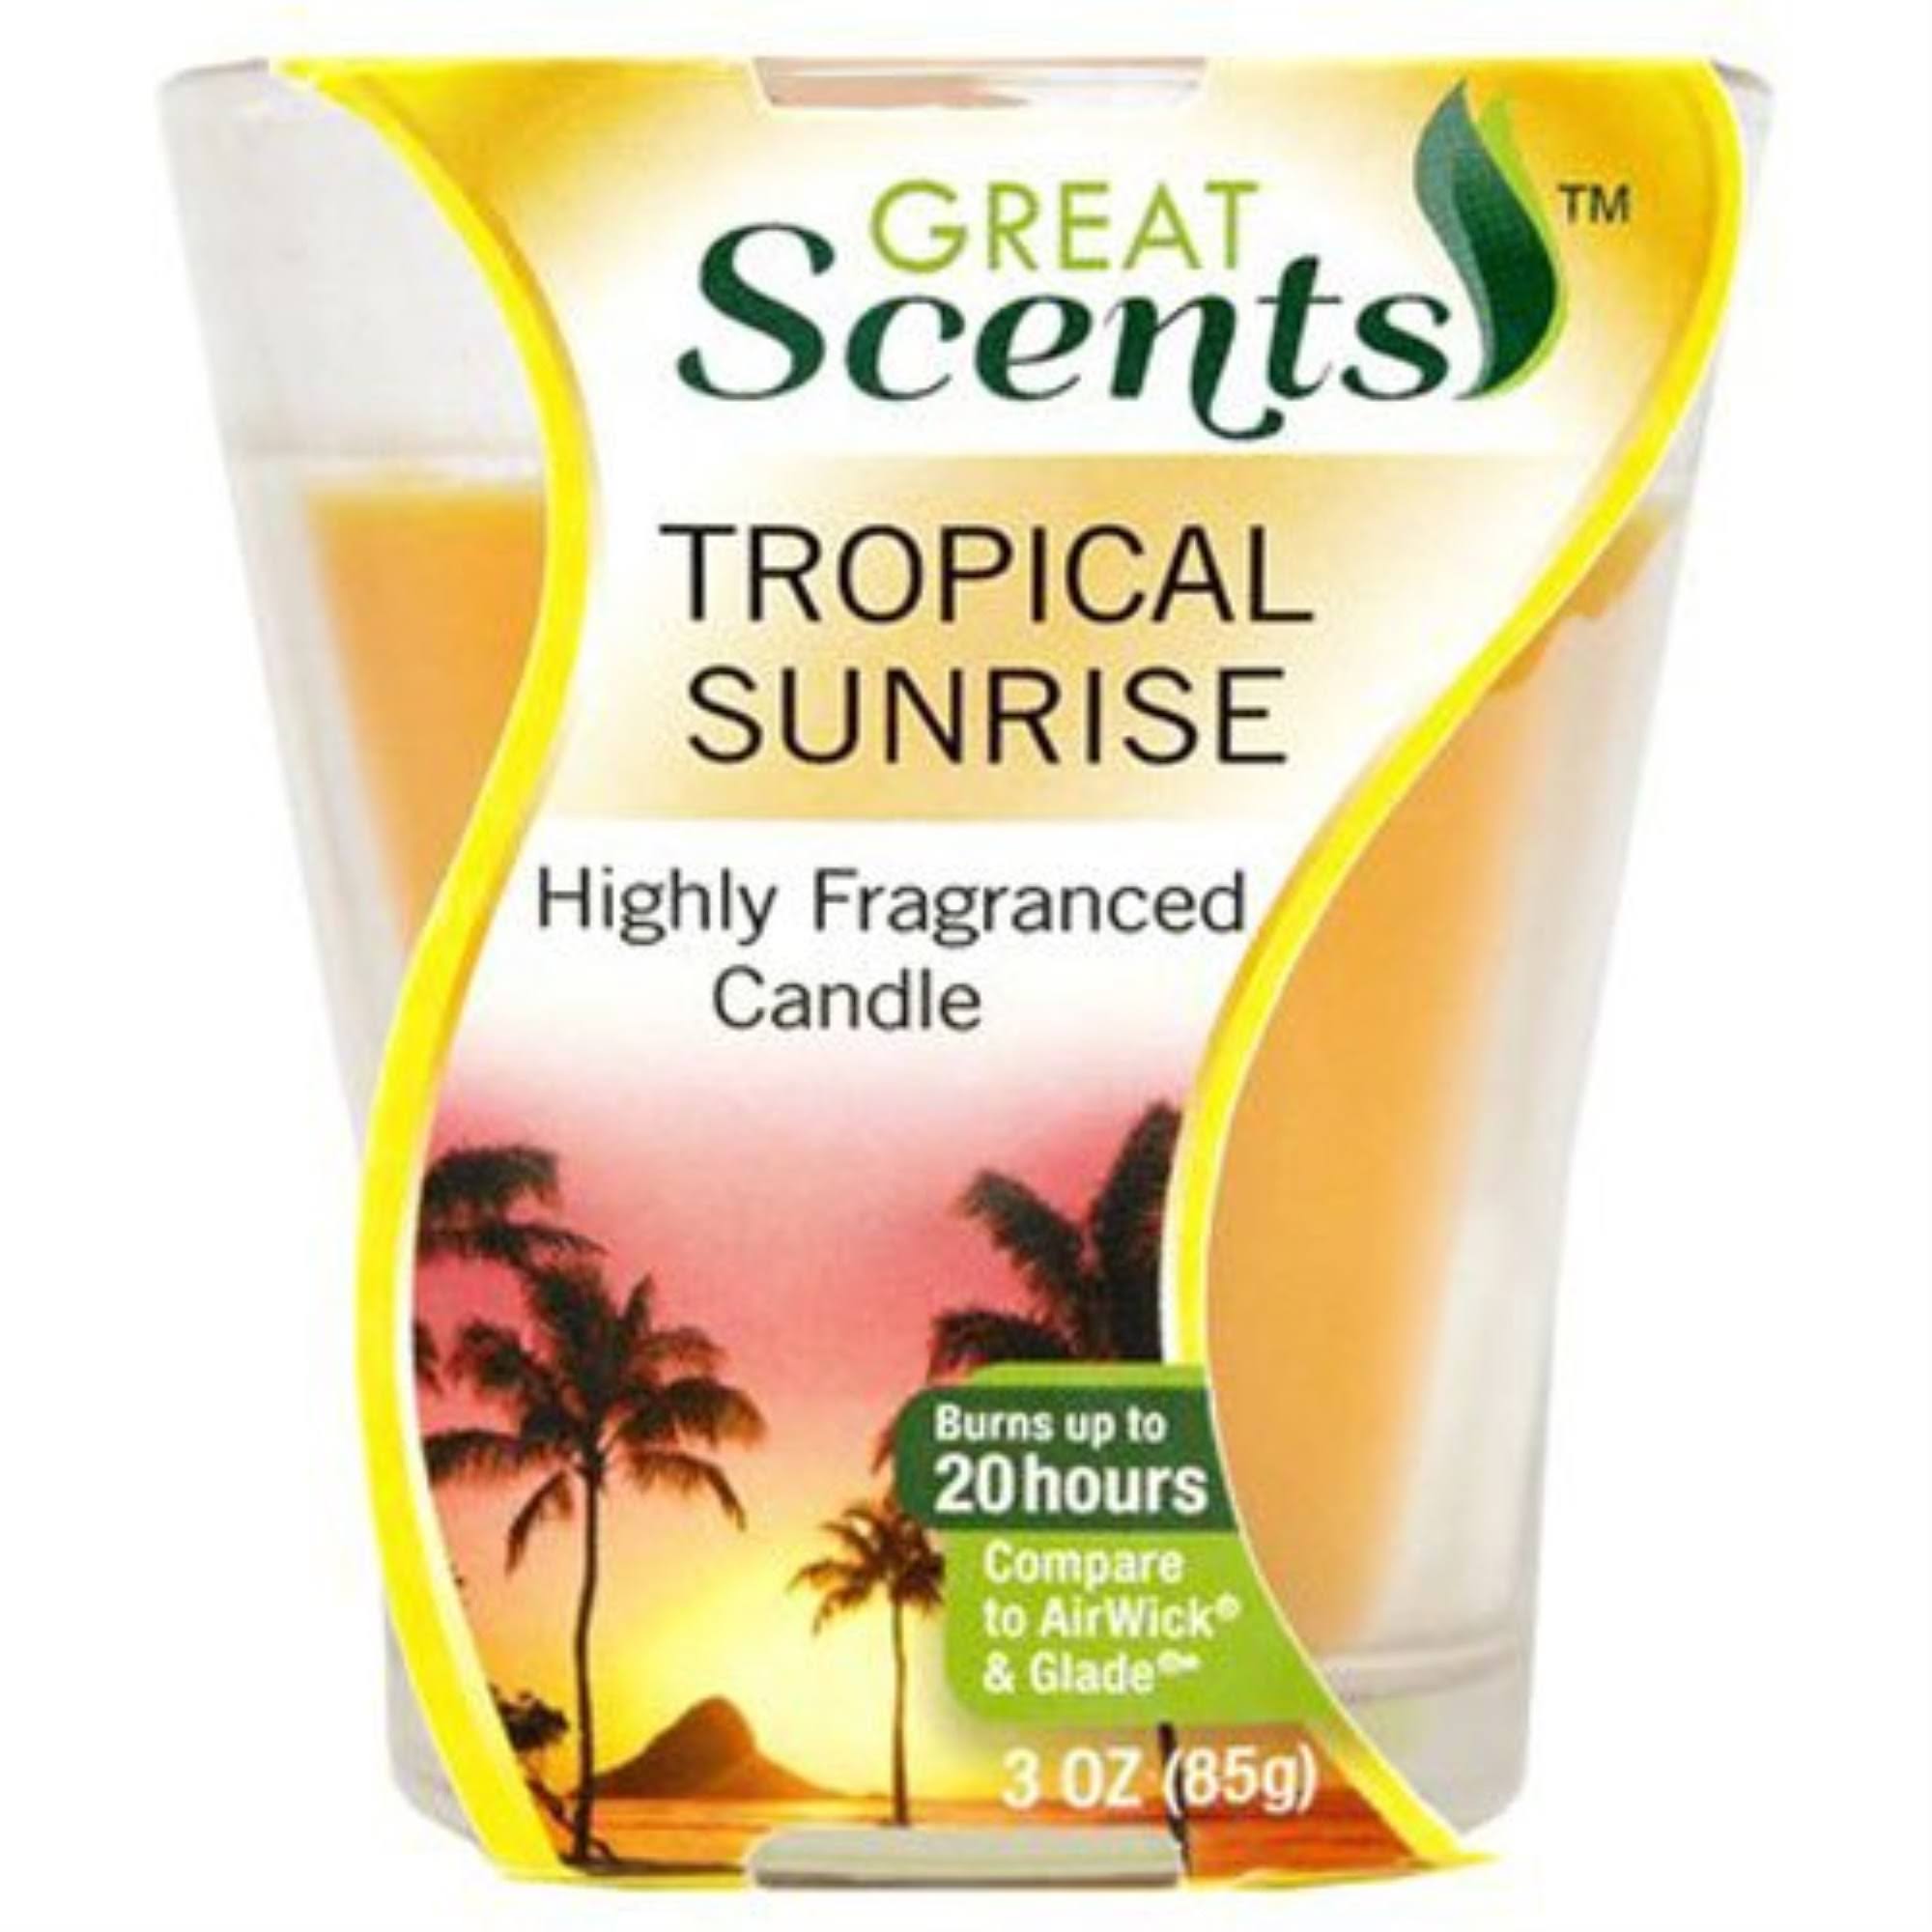 Great Scents Highly Fragranced Candle - Tropical Sunrise, 3oz